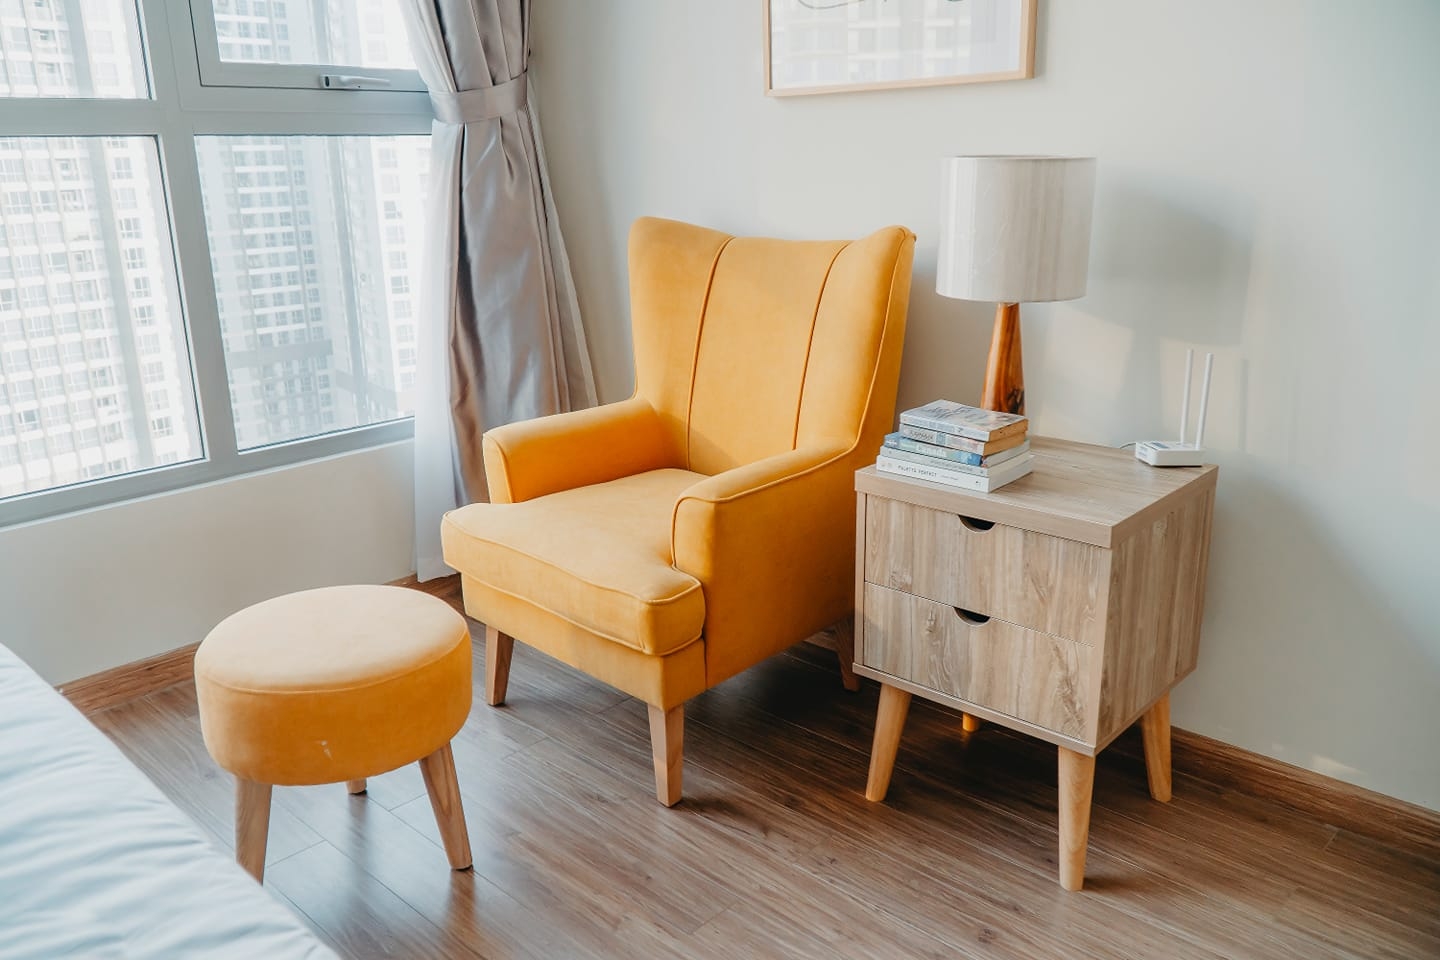 Why Investing in Quality Furniture Matters